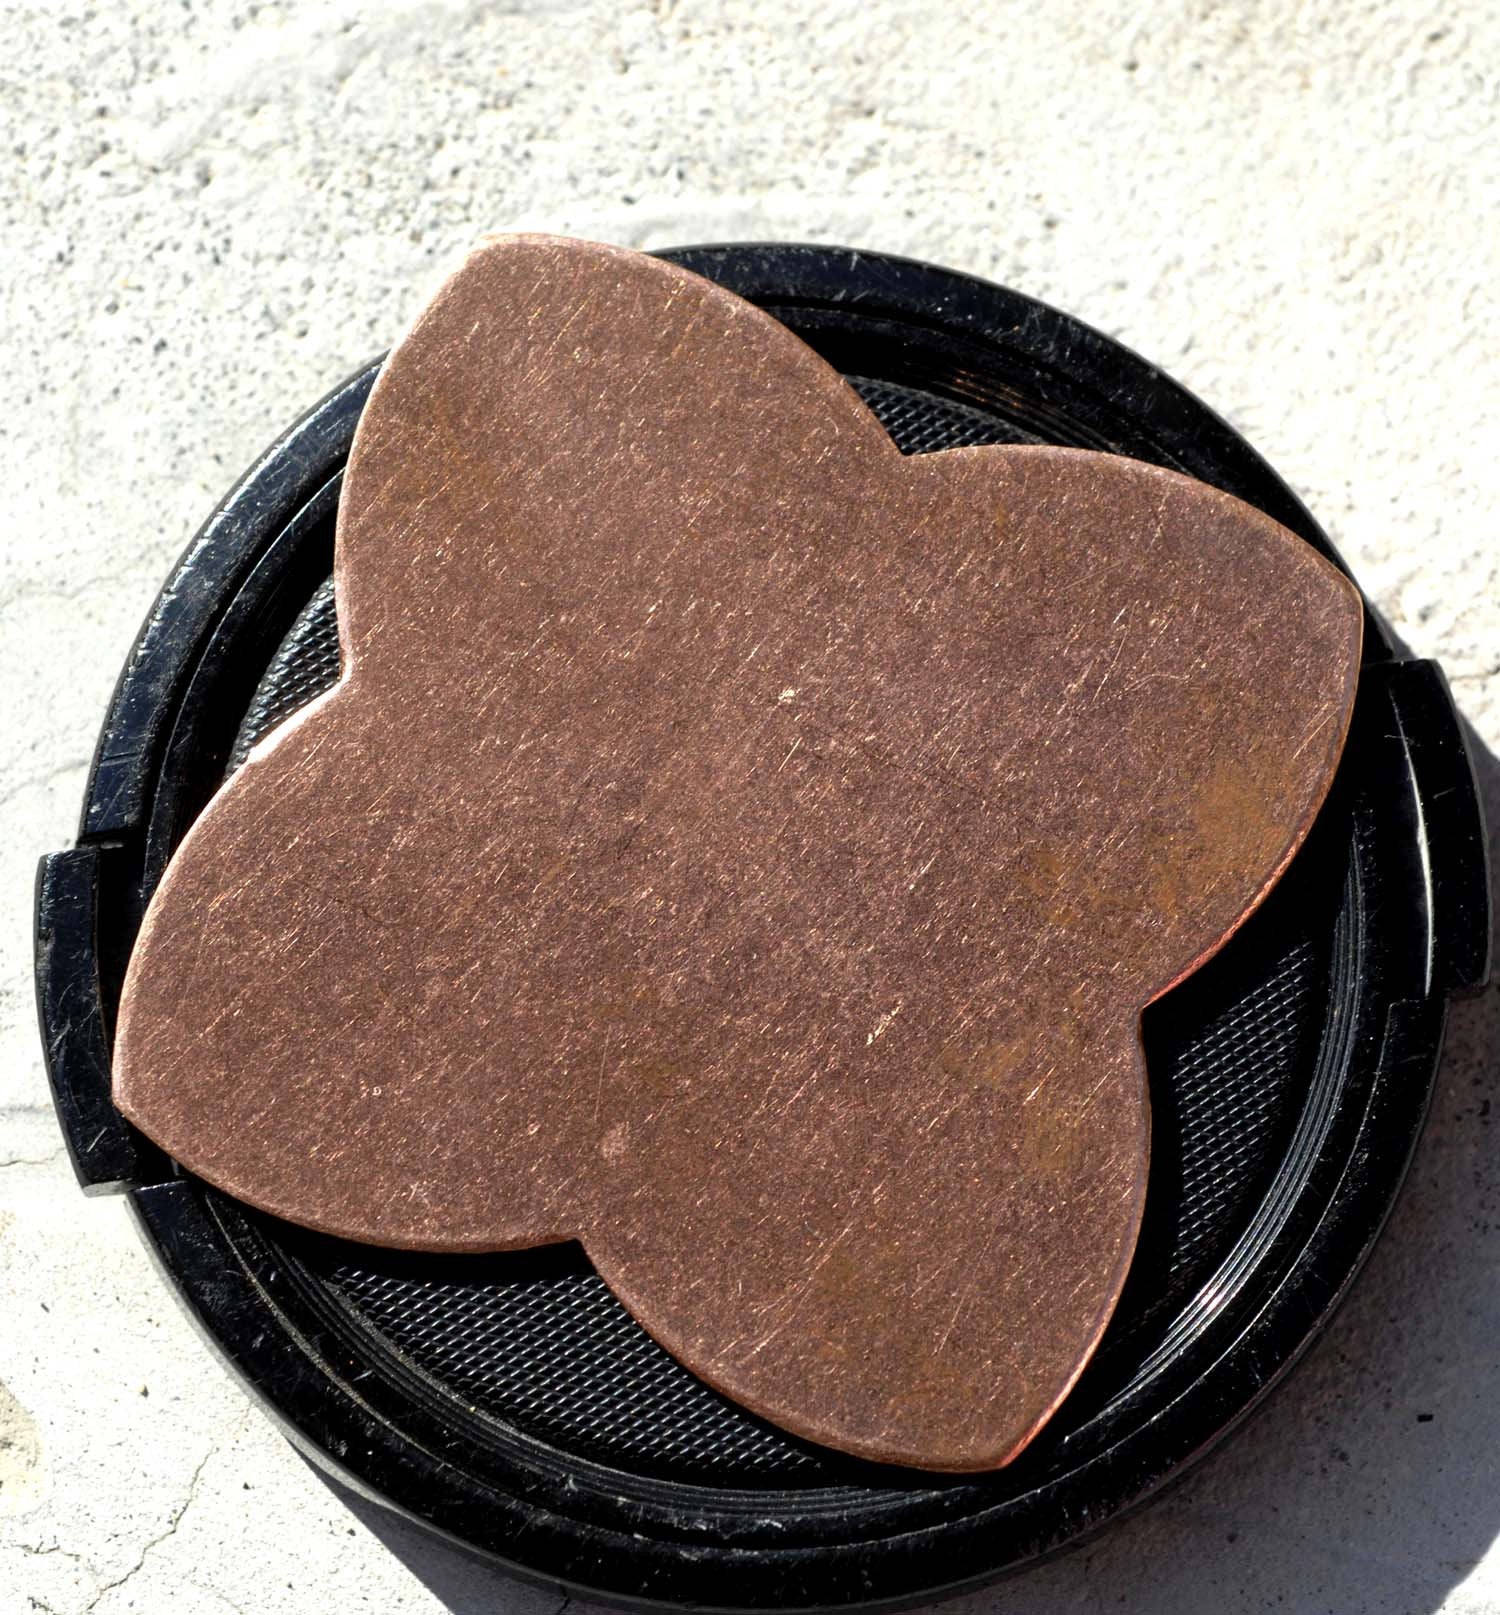 Copper Wide Quatrefoil Flower 49mm 20g,Blanks Enameling Stamping Texturing Variety of Metals - 2 pieces